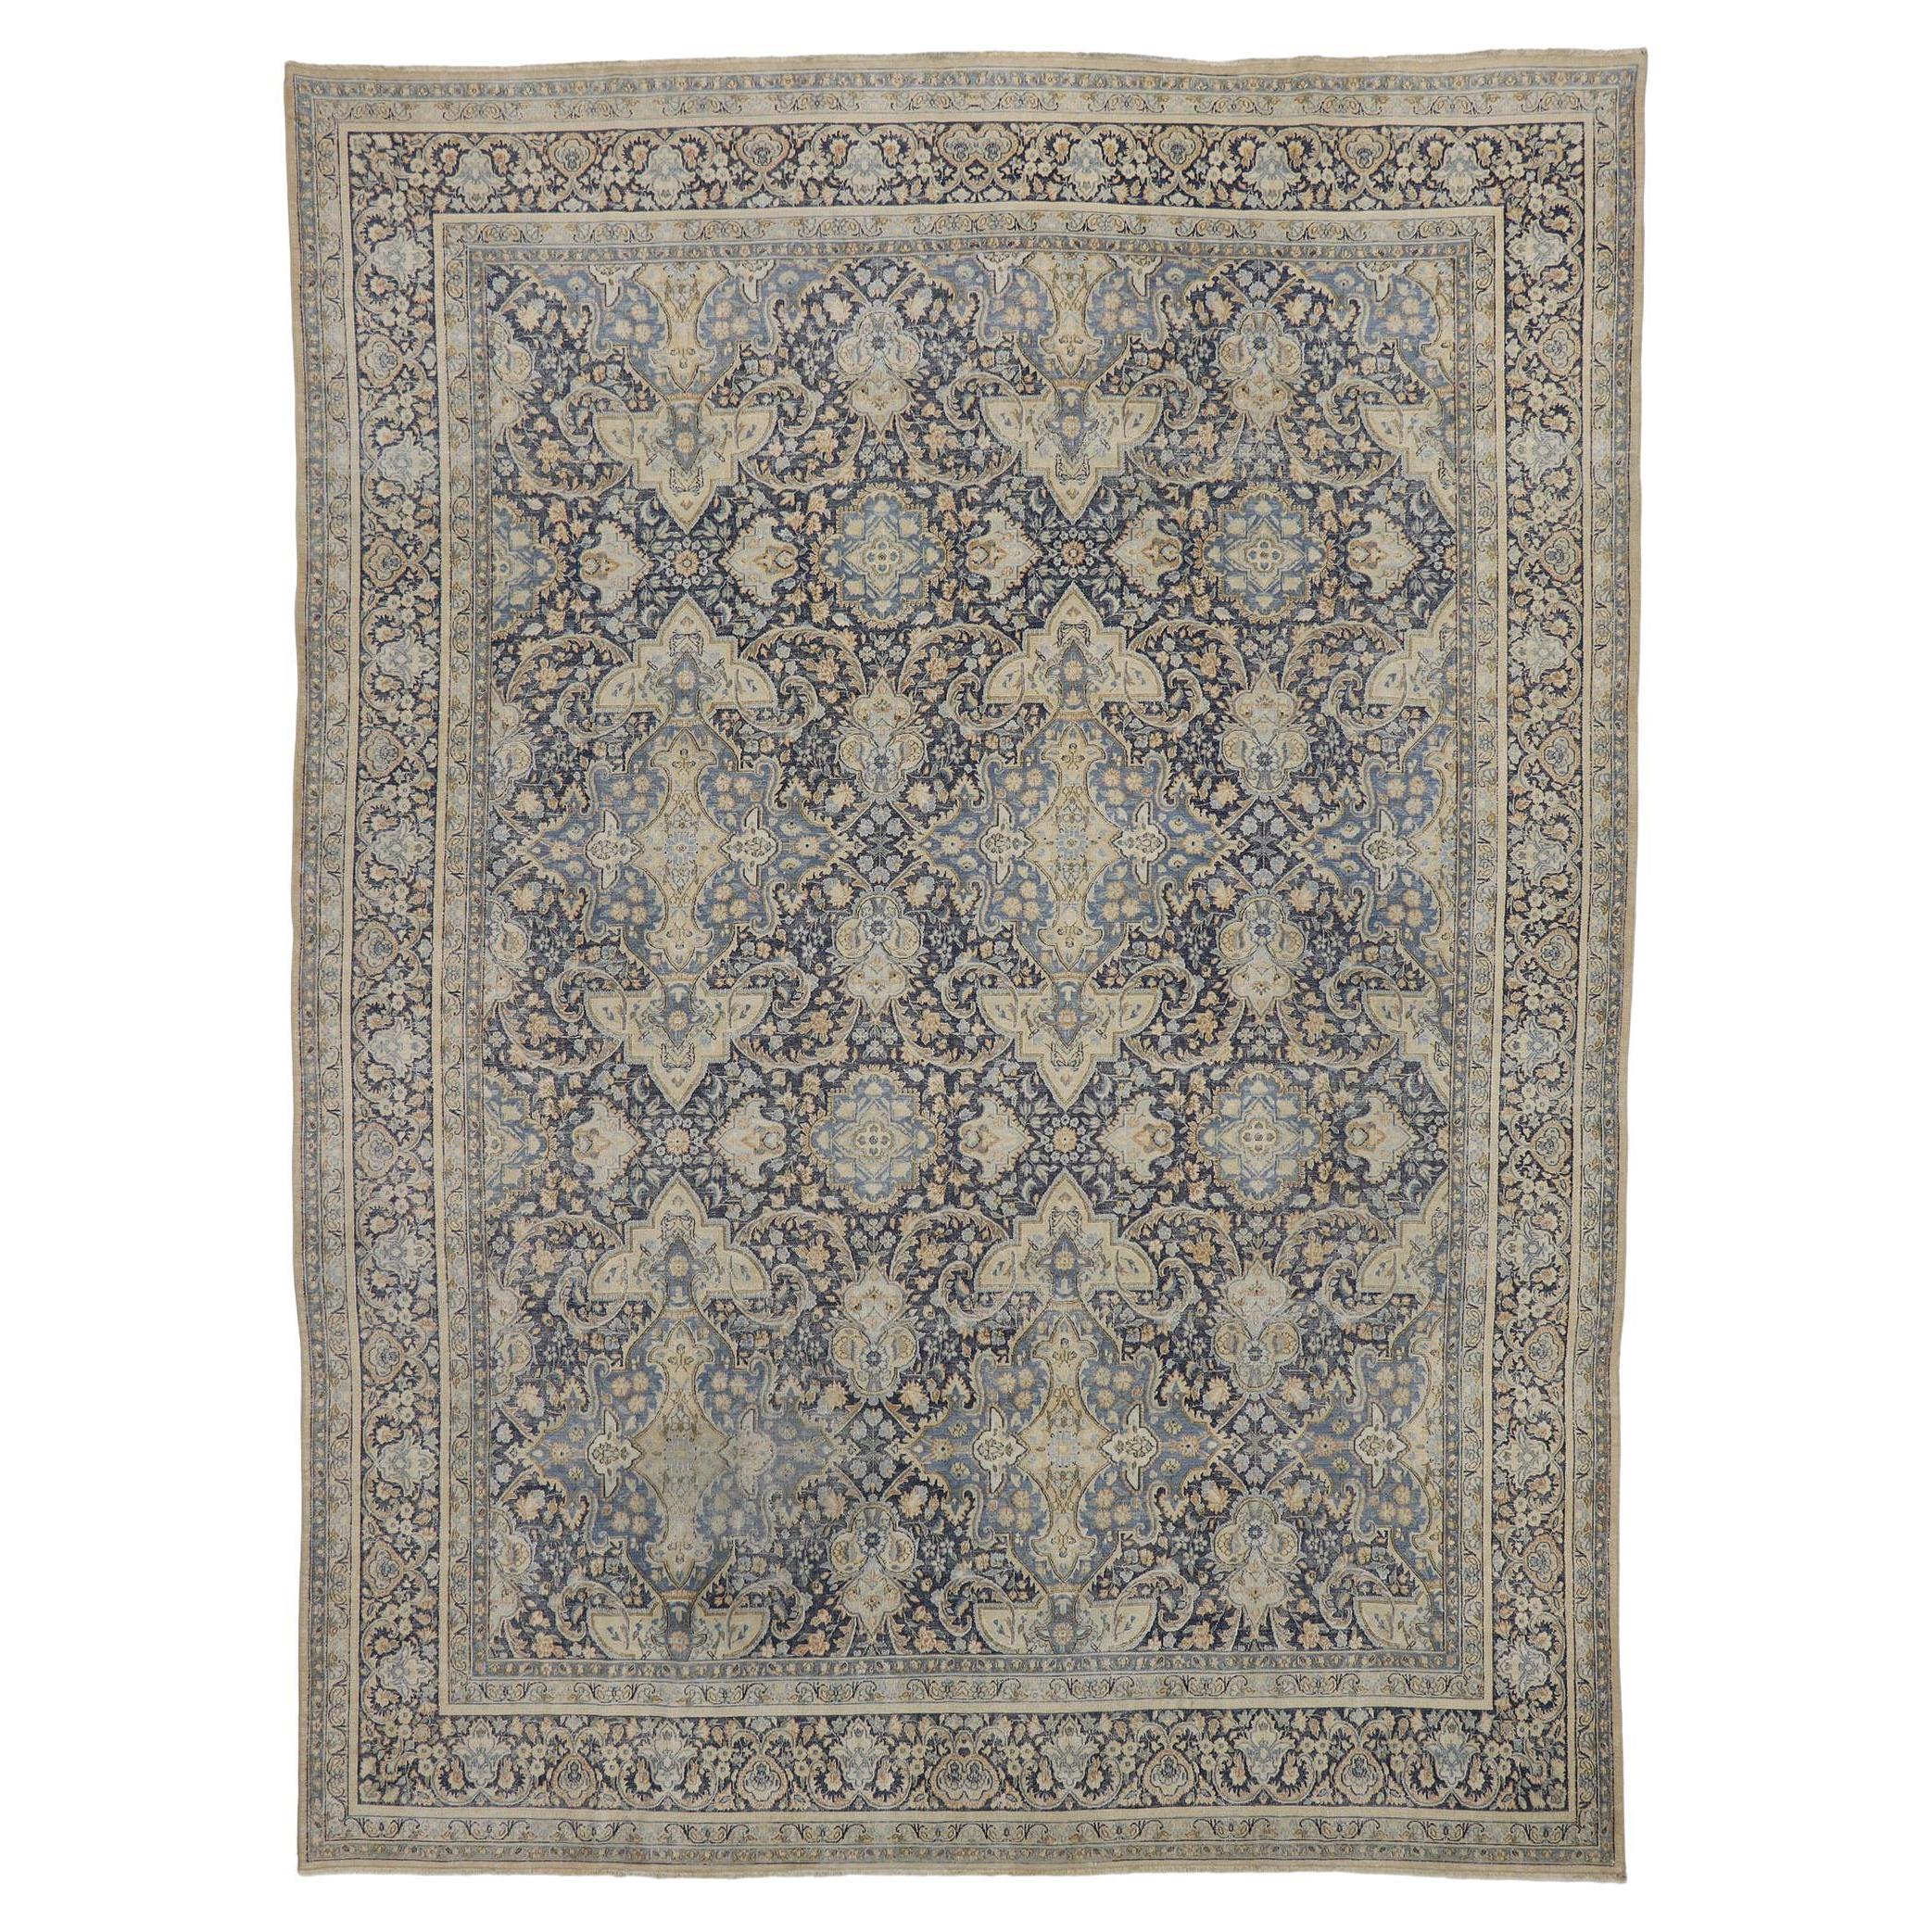 Distressed Antique Persian Kerman Rug with Rustic Style